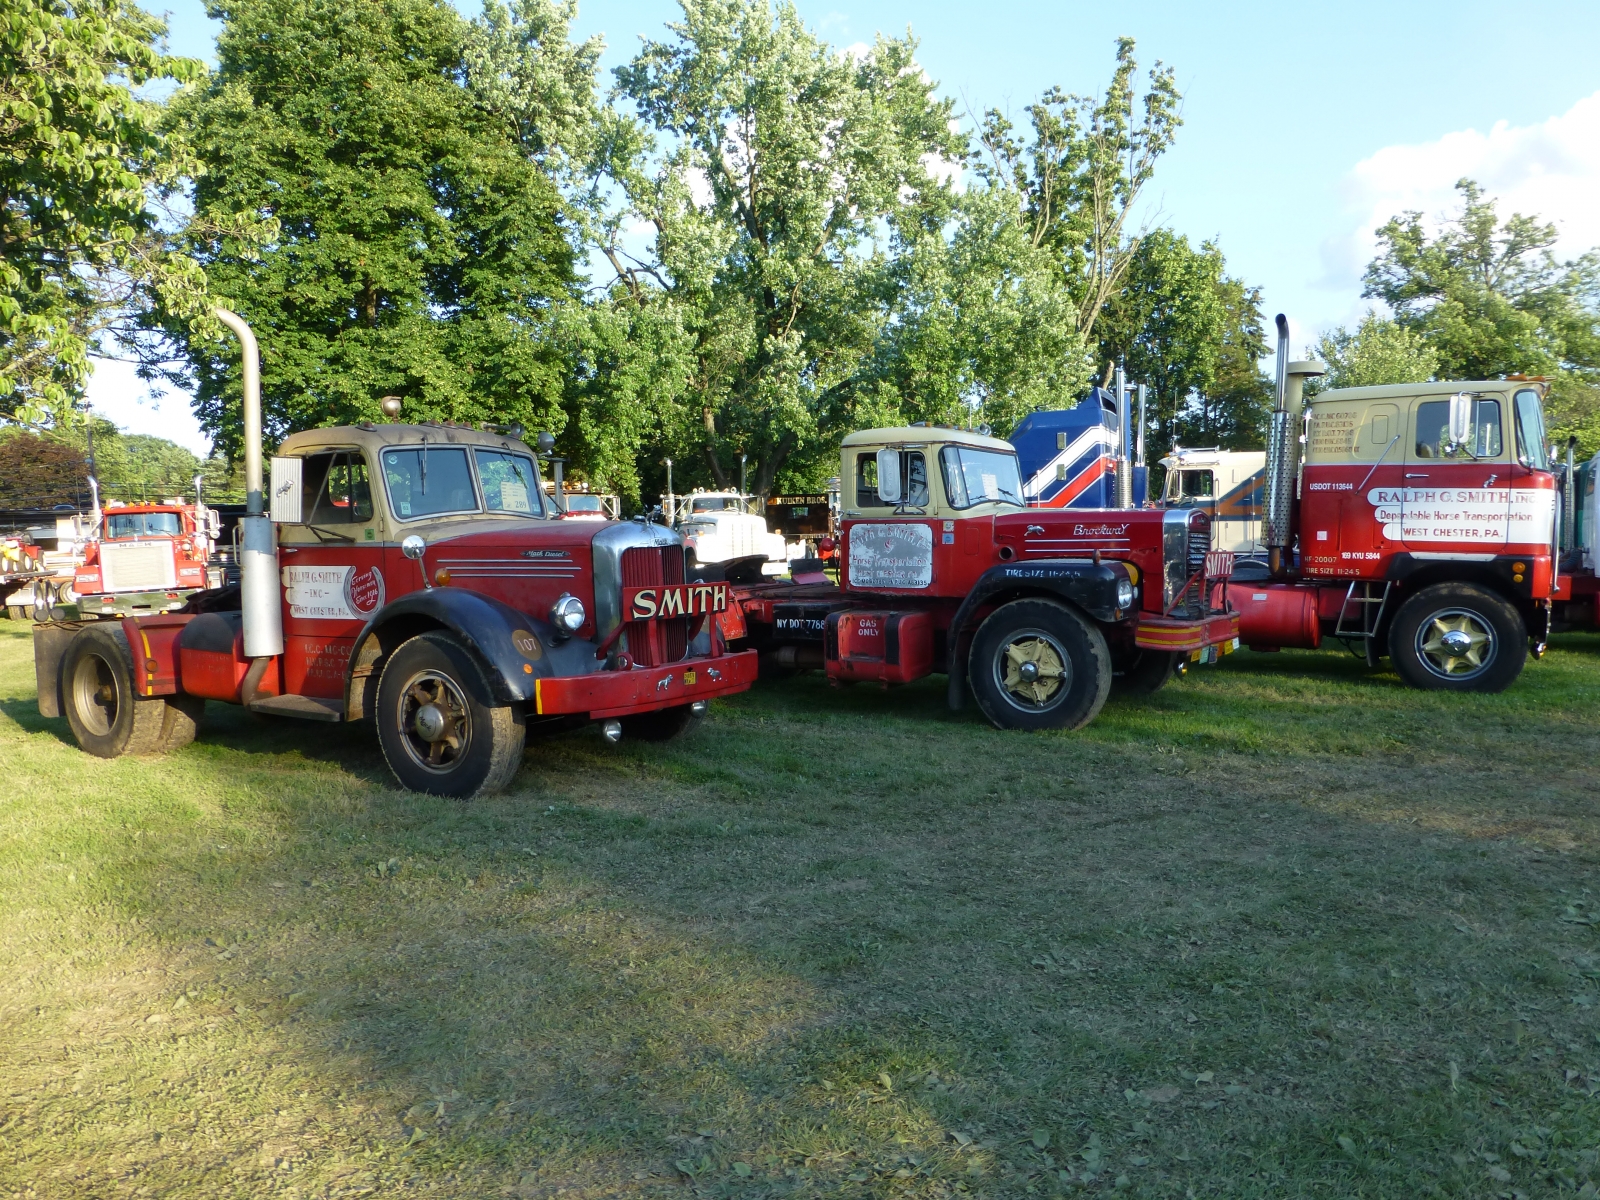 Macungie Truck Show 2013